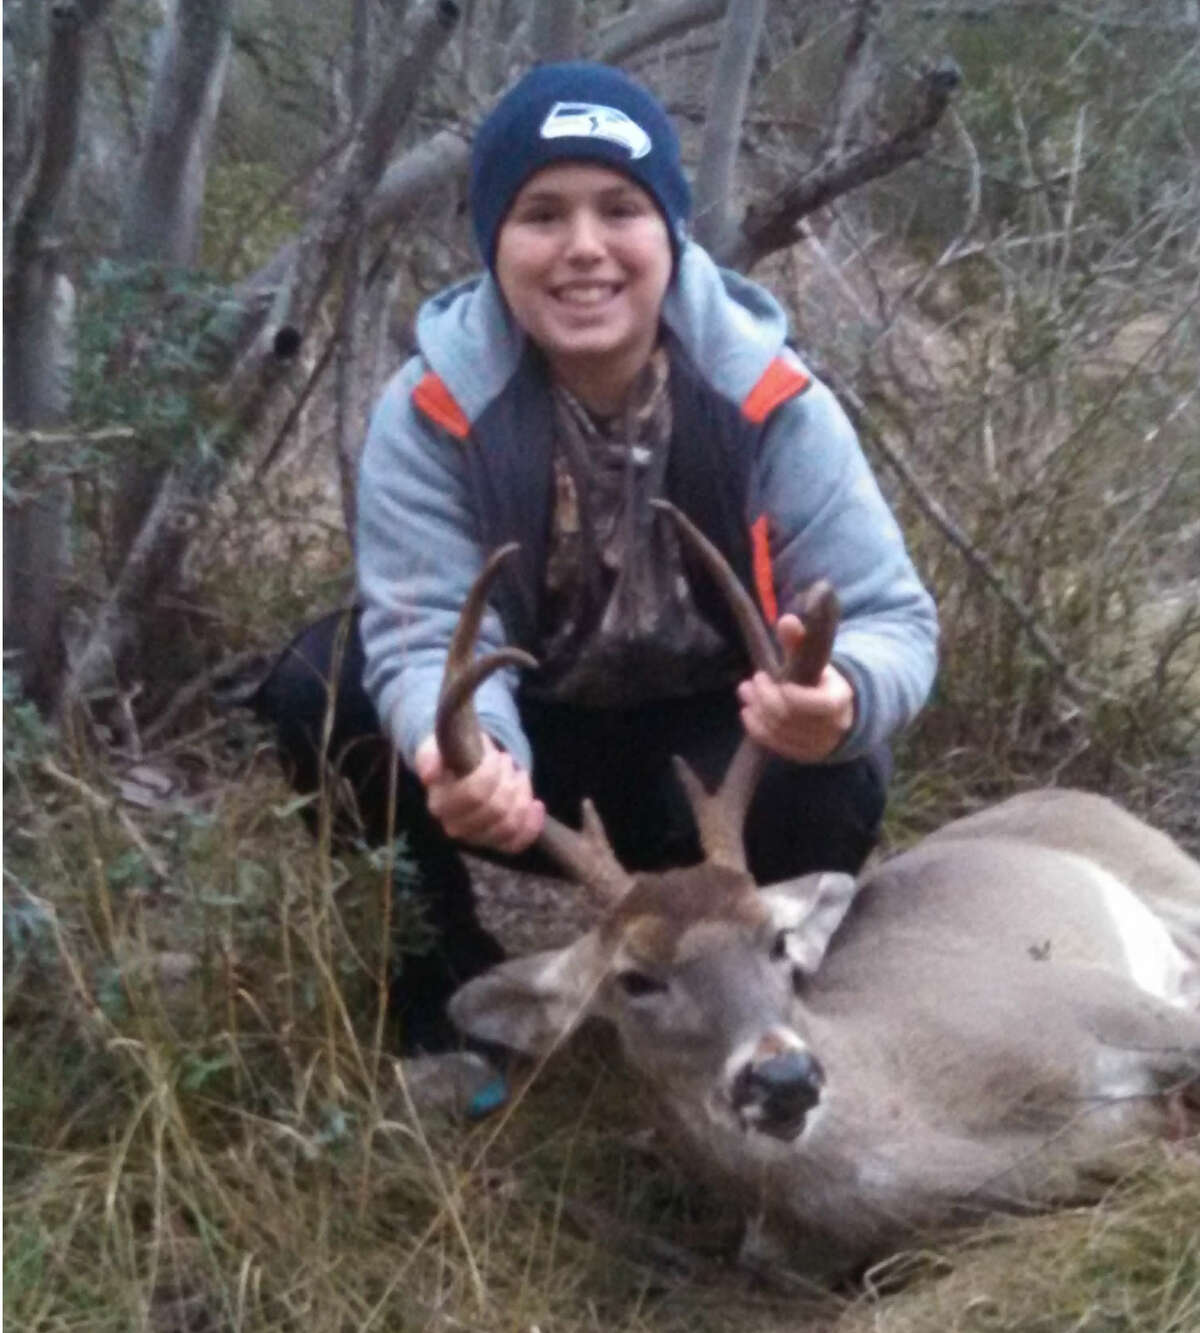 "Holden Craver, 10 years old, of Nederland killed this 8 point in Junction, Texas on December 27."